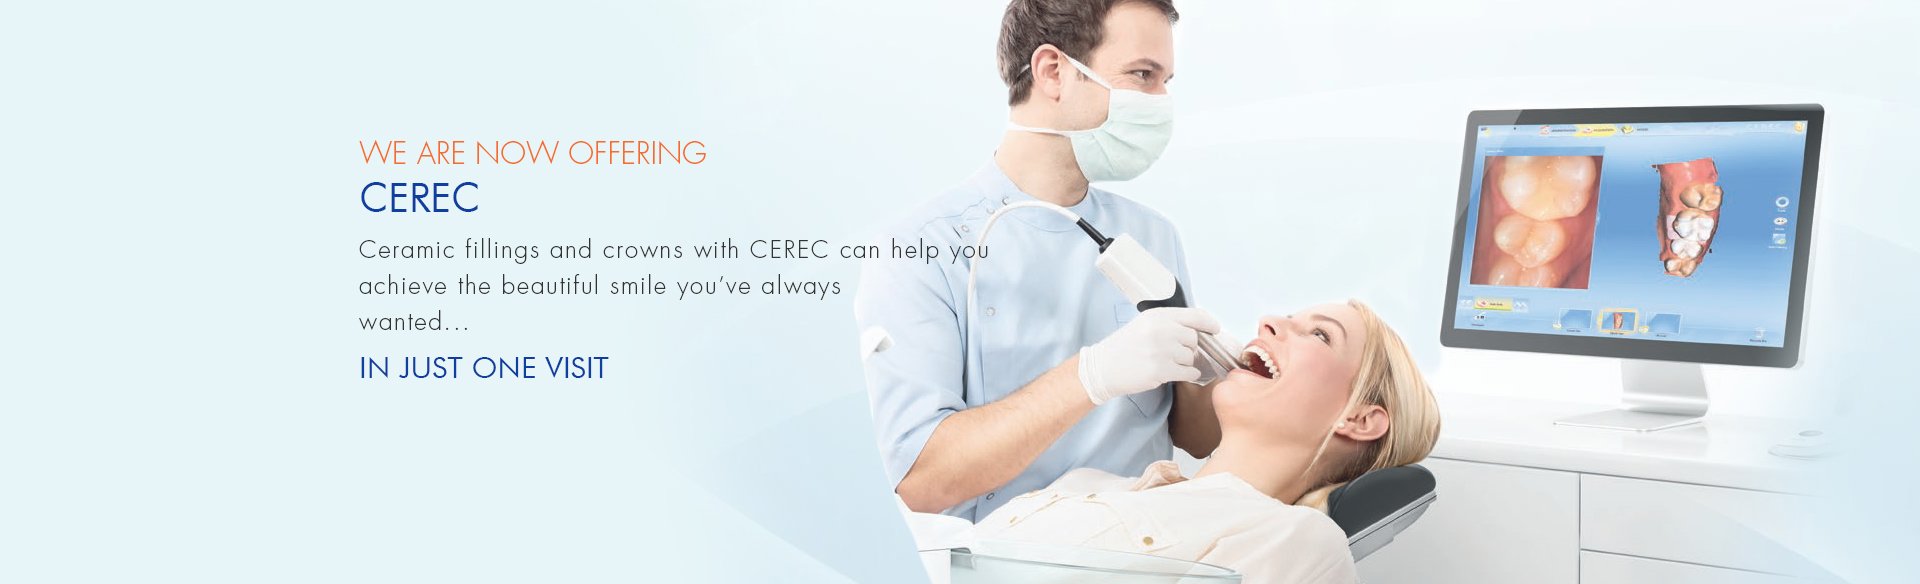 Dr. Carlos Garcia near Glendale CA, Image Of We are Now Offering CEREC